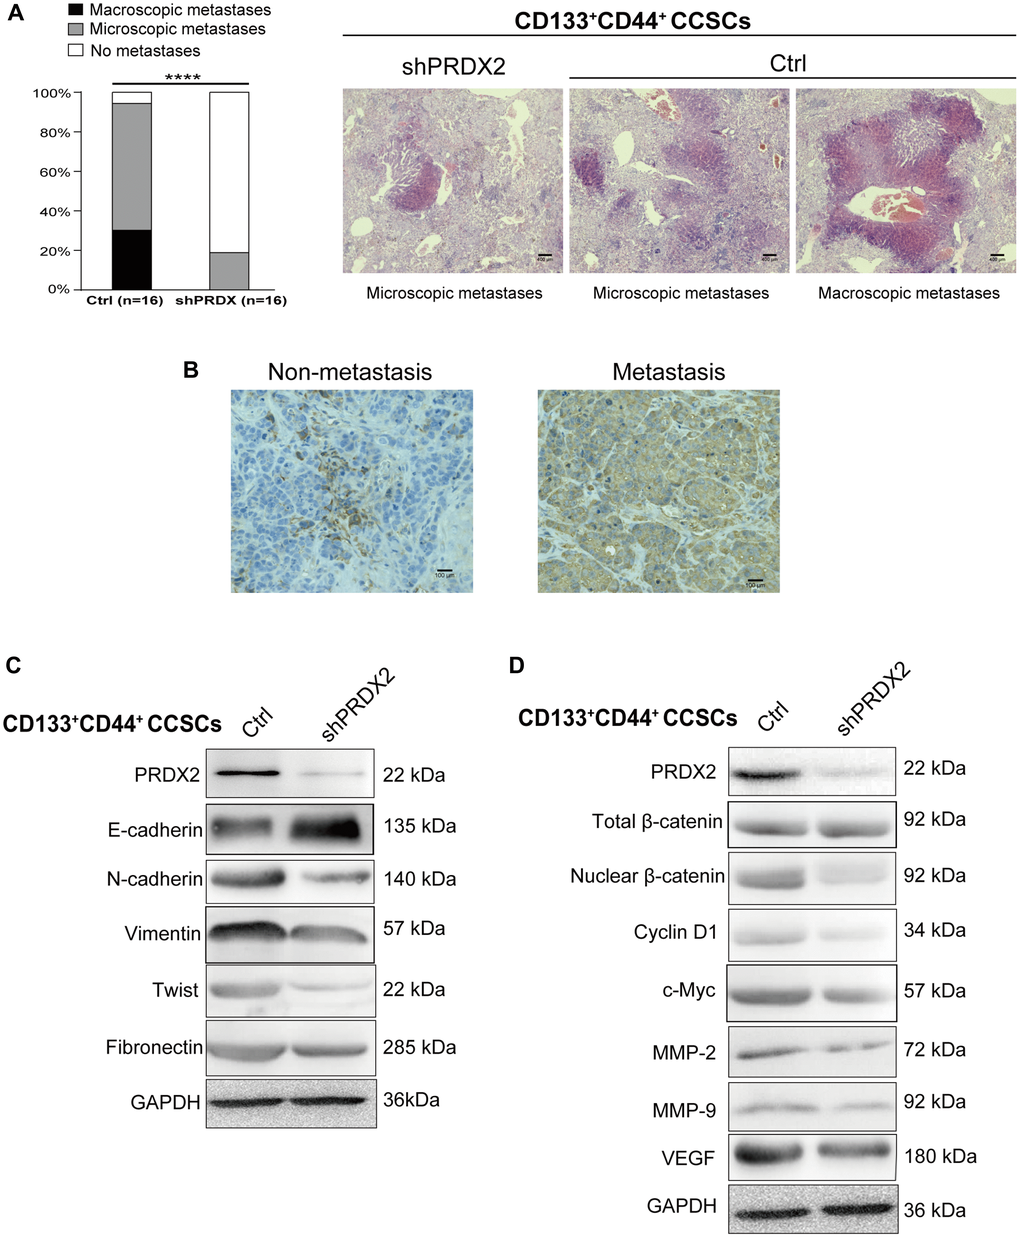 PRDX2 knockdown inhibits the metastatic capacity of CCSCs. (A) Histological analysis of the liver for metastatic lesions was performed by hematoxylin and eosin staining. The metastatic status of the mice (n = 16 per group) with orthotopic implantation of 1 × 104 cells dissociated from HCT116/HT29-control or -shPRDX2 CD133+CD44+ CCSCs is provided separately as macroscopic (black) and microscopic (gray) evidence for metastasis (left panel). Statistical analysis: Fisher’s exact test, ***p +CD44+ CCSCs and a mouse receiving shPRDX2-HCT116-CD133-CD44- CCSCs (right panel). (B) Representative IHC staining for PRDX2 reveals that higher PRDX2 expression was detected in the orthotopic tumor tissues from metastatic cases than in tumor samples from nonmetastatic mice. (C) Western blot analysis of EMT protein expression in lysates of control- and shPRDX2-CD133+CD44+ CCSCs. (D) Western blot analysis of Wnt/β-catenin signaling pathway protein expression in lysates of control- and shPRDX2-CD133+CD44+ CCSCs.